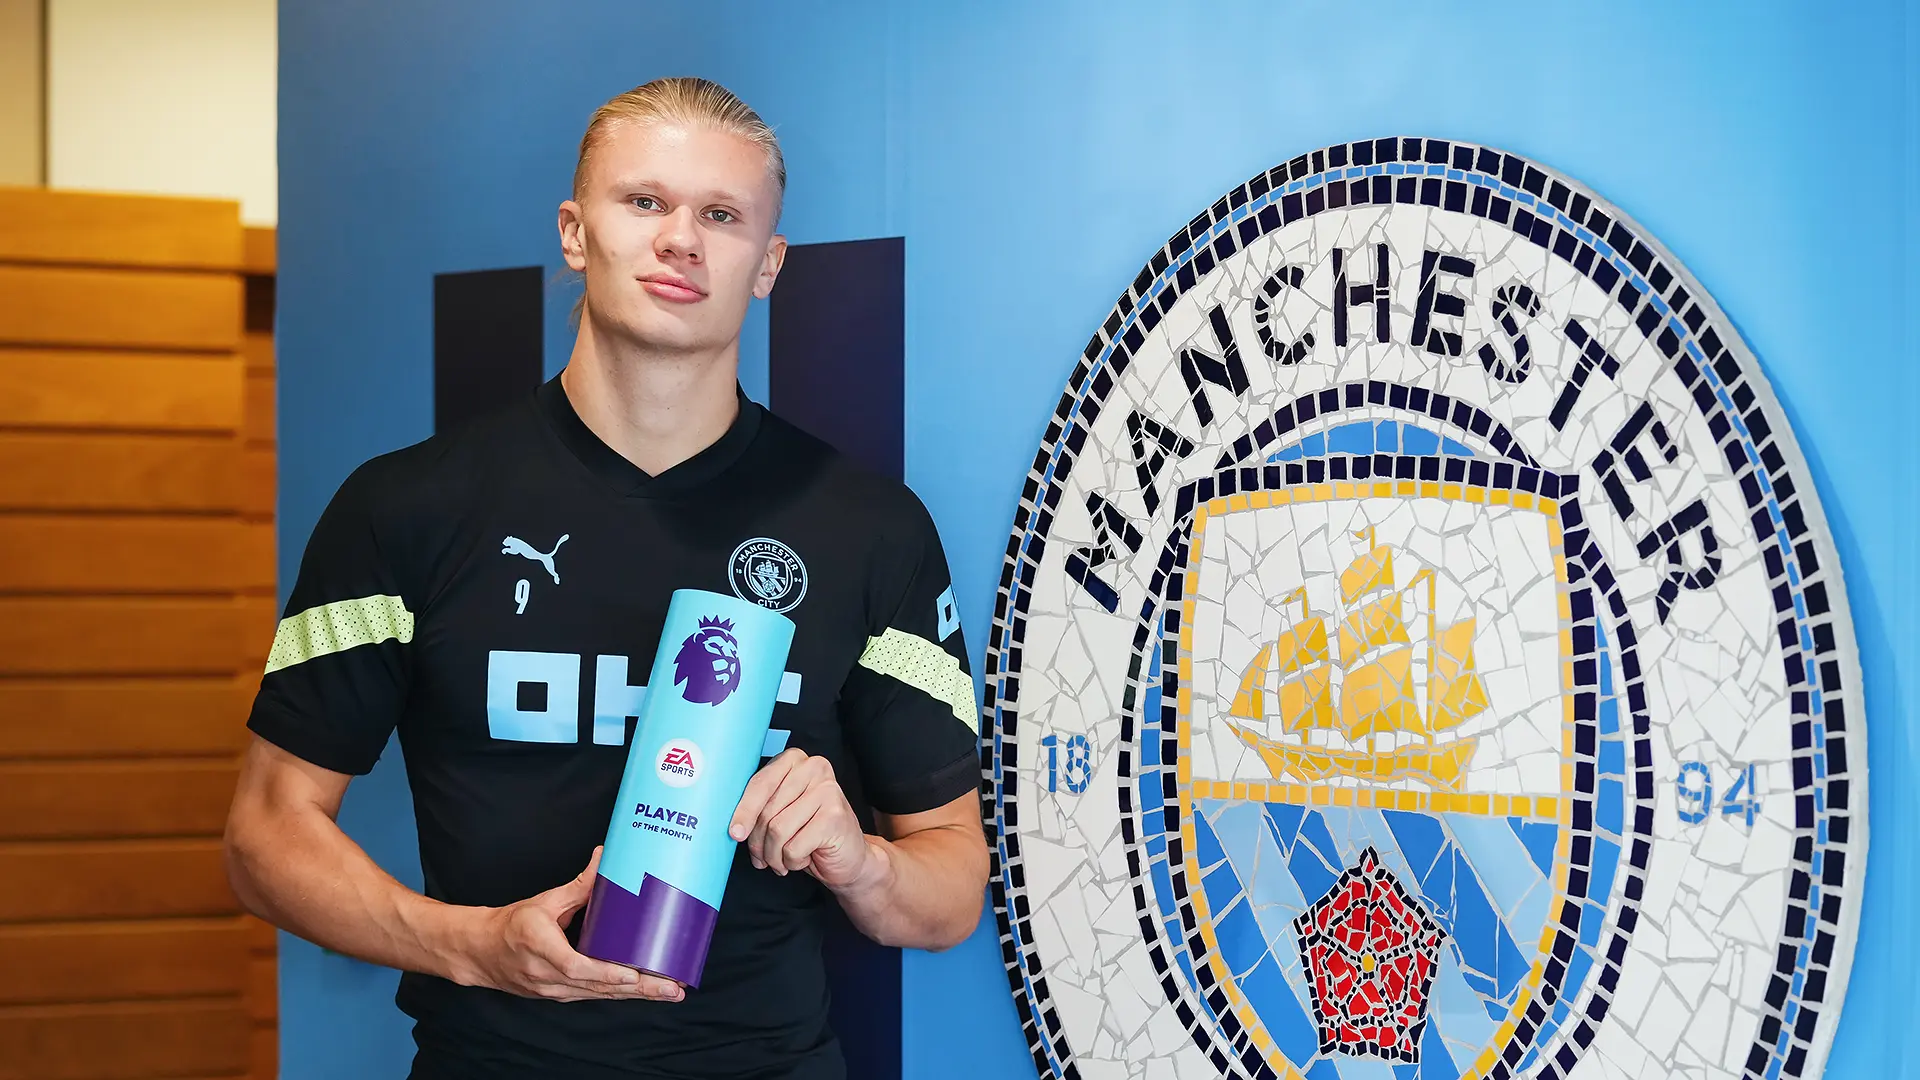 Haaland wins Premier League Player of the Month for August